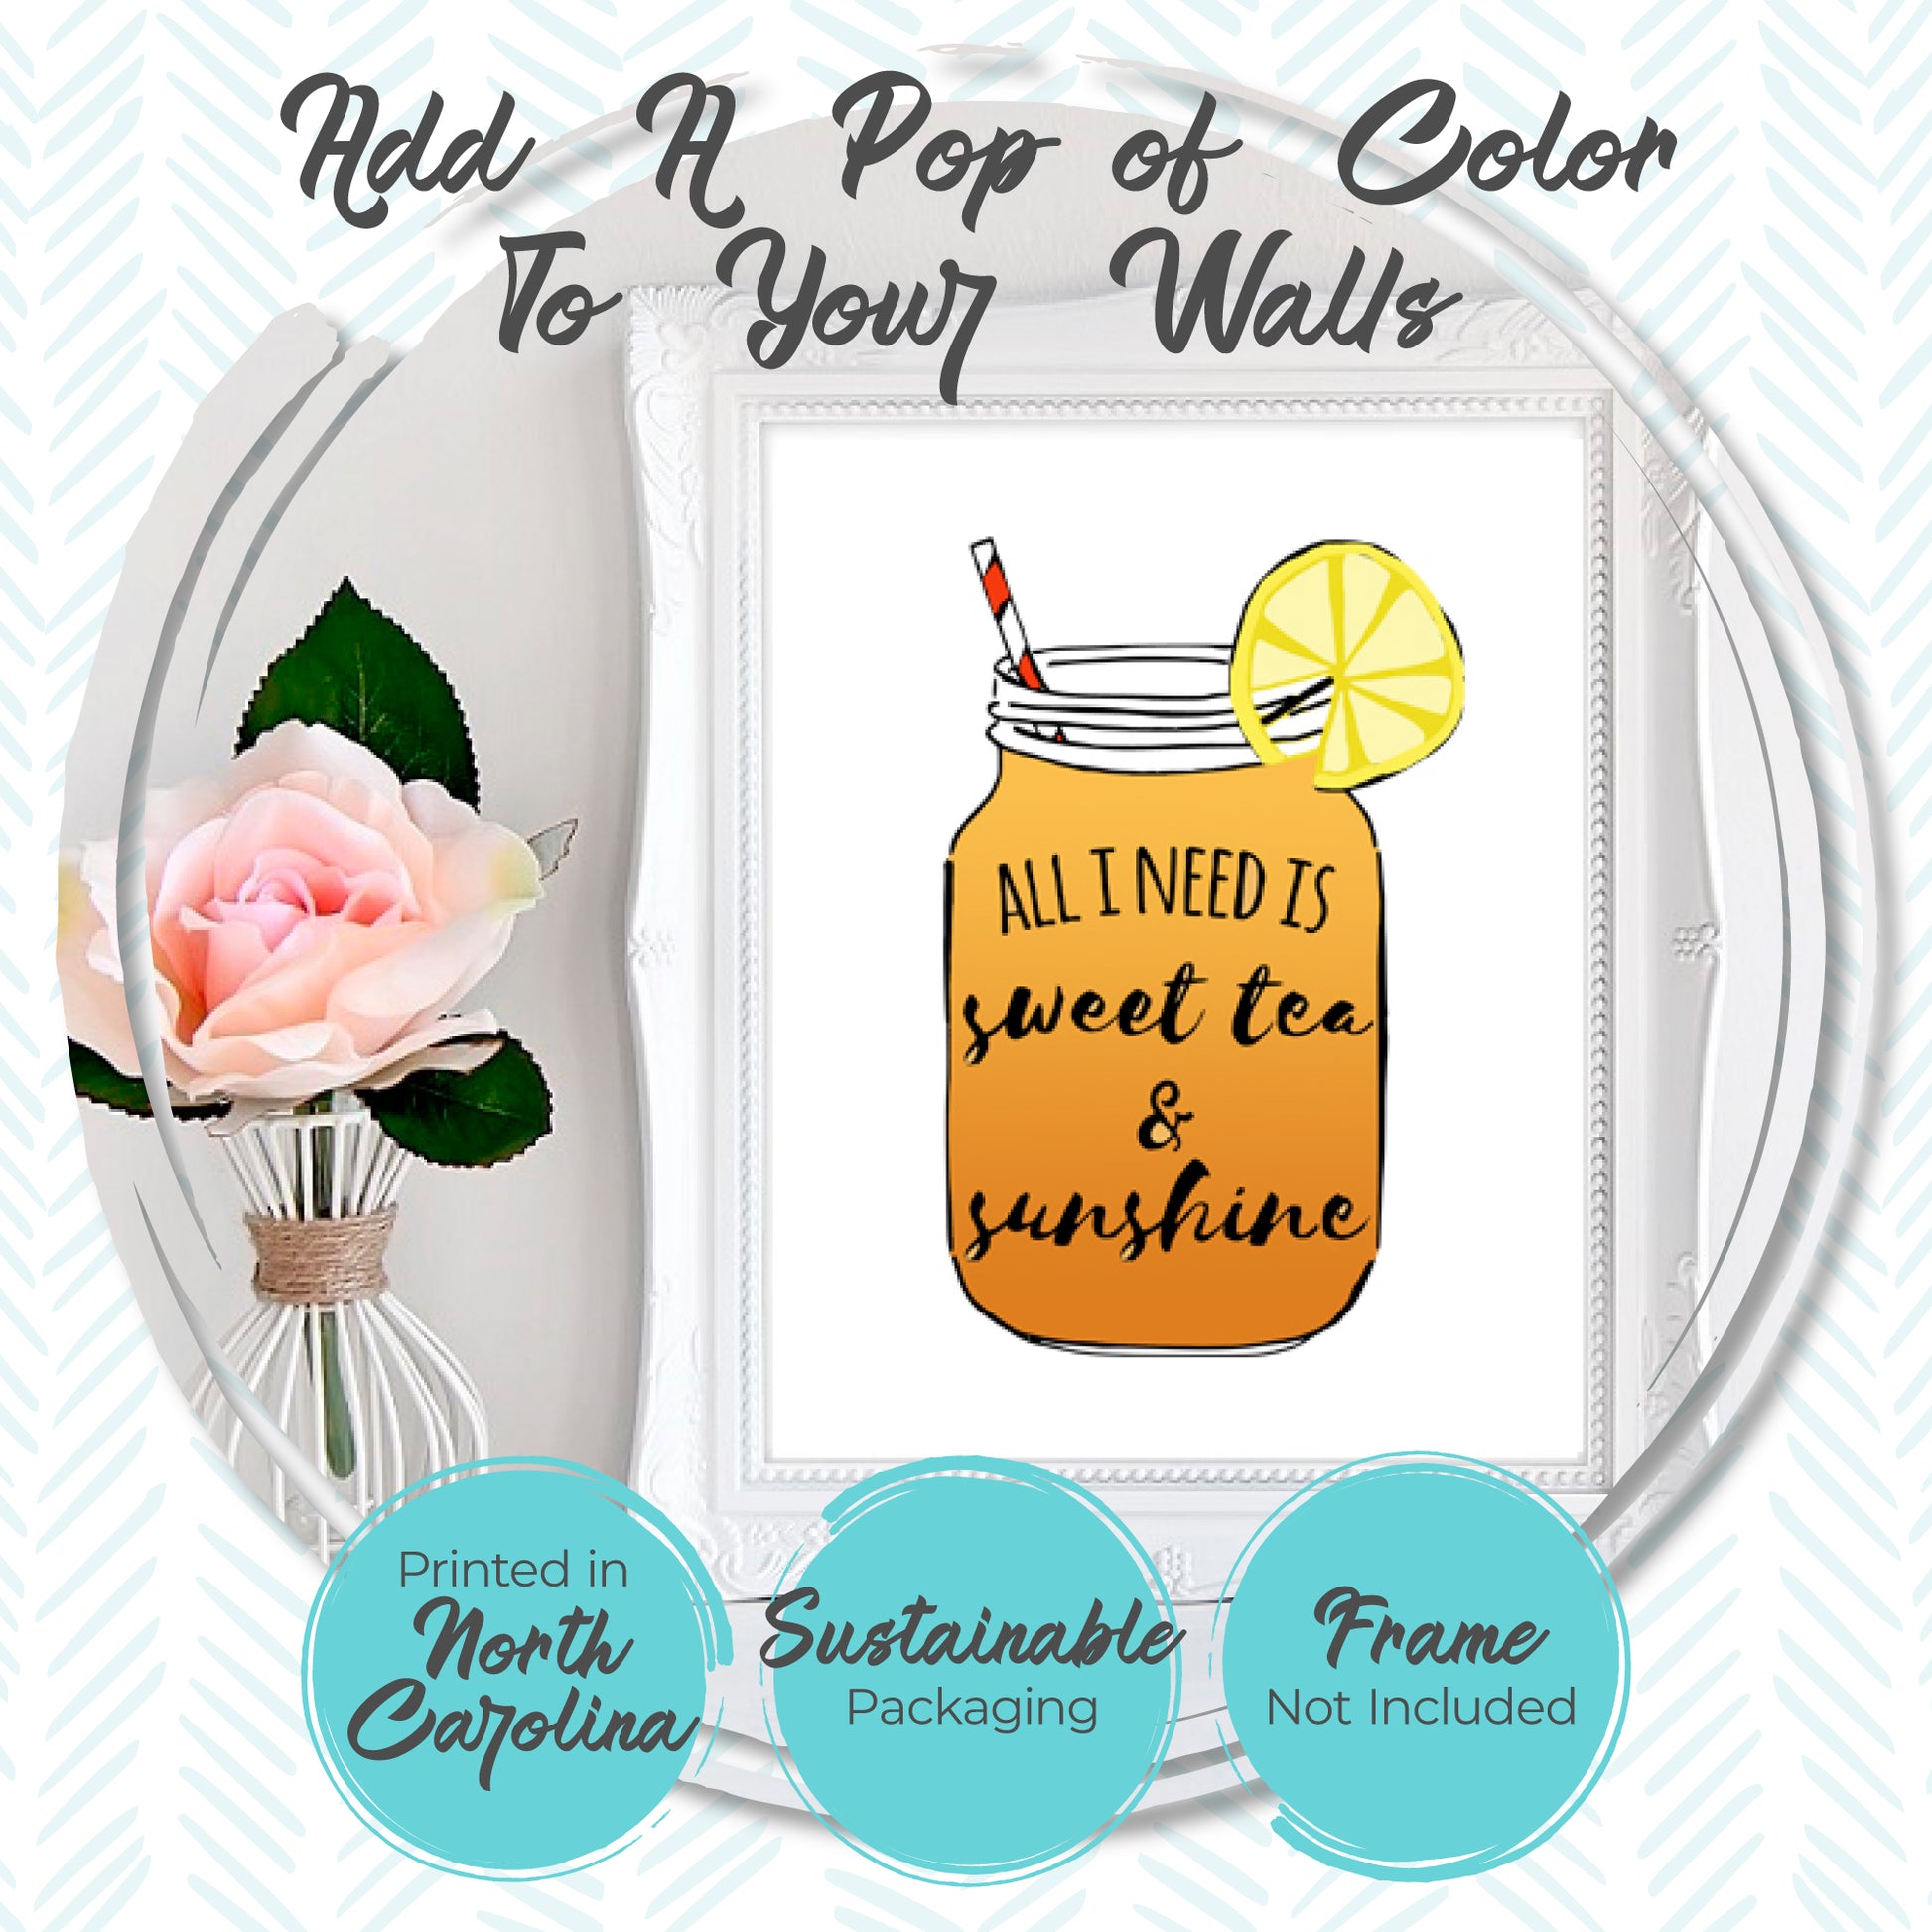 Keep Your Gin Up - 8"x10" Wall Print - MoonlightMakers